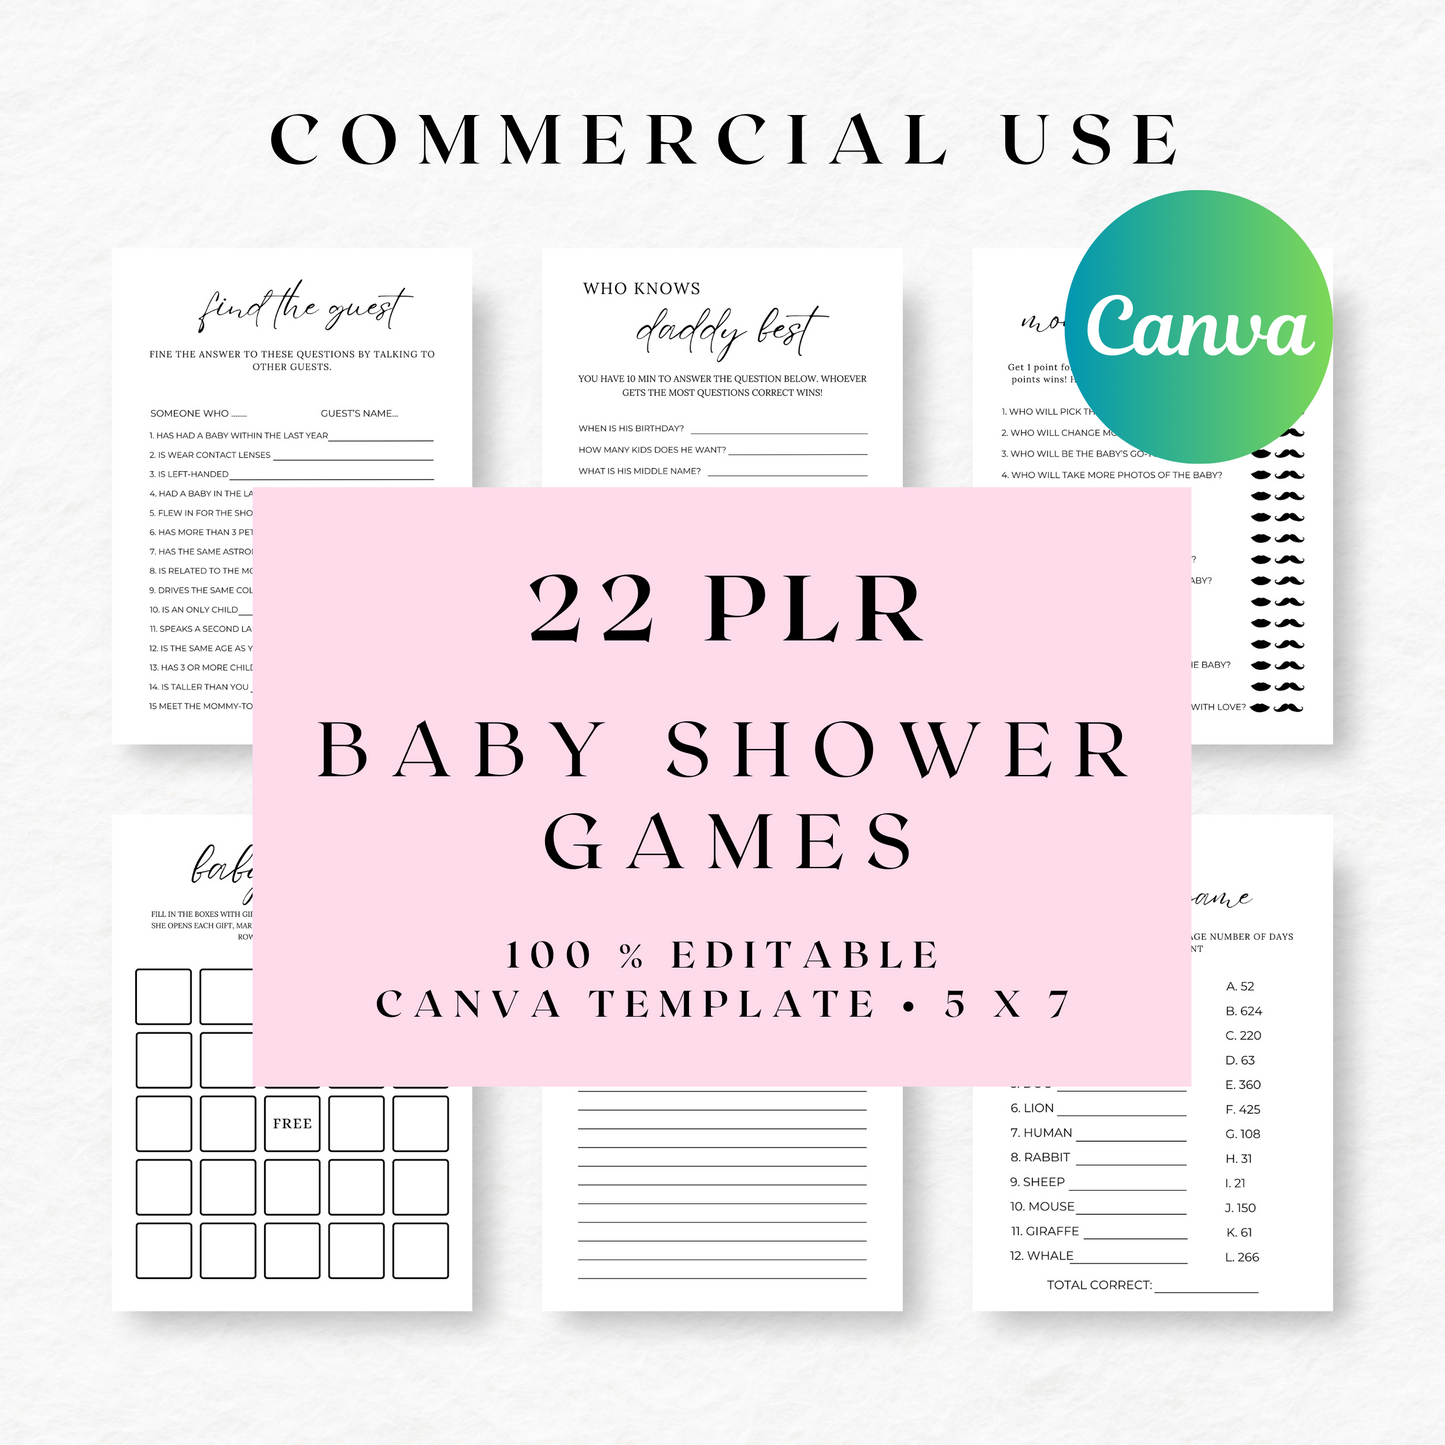 PLR - Baby Shower Games Template (Commercial Use)